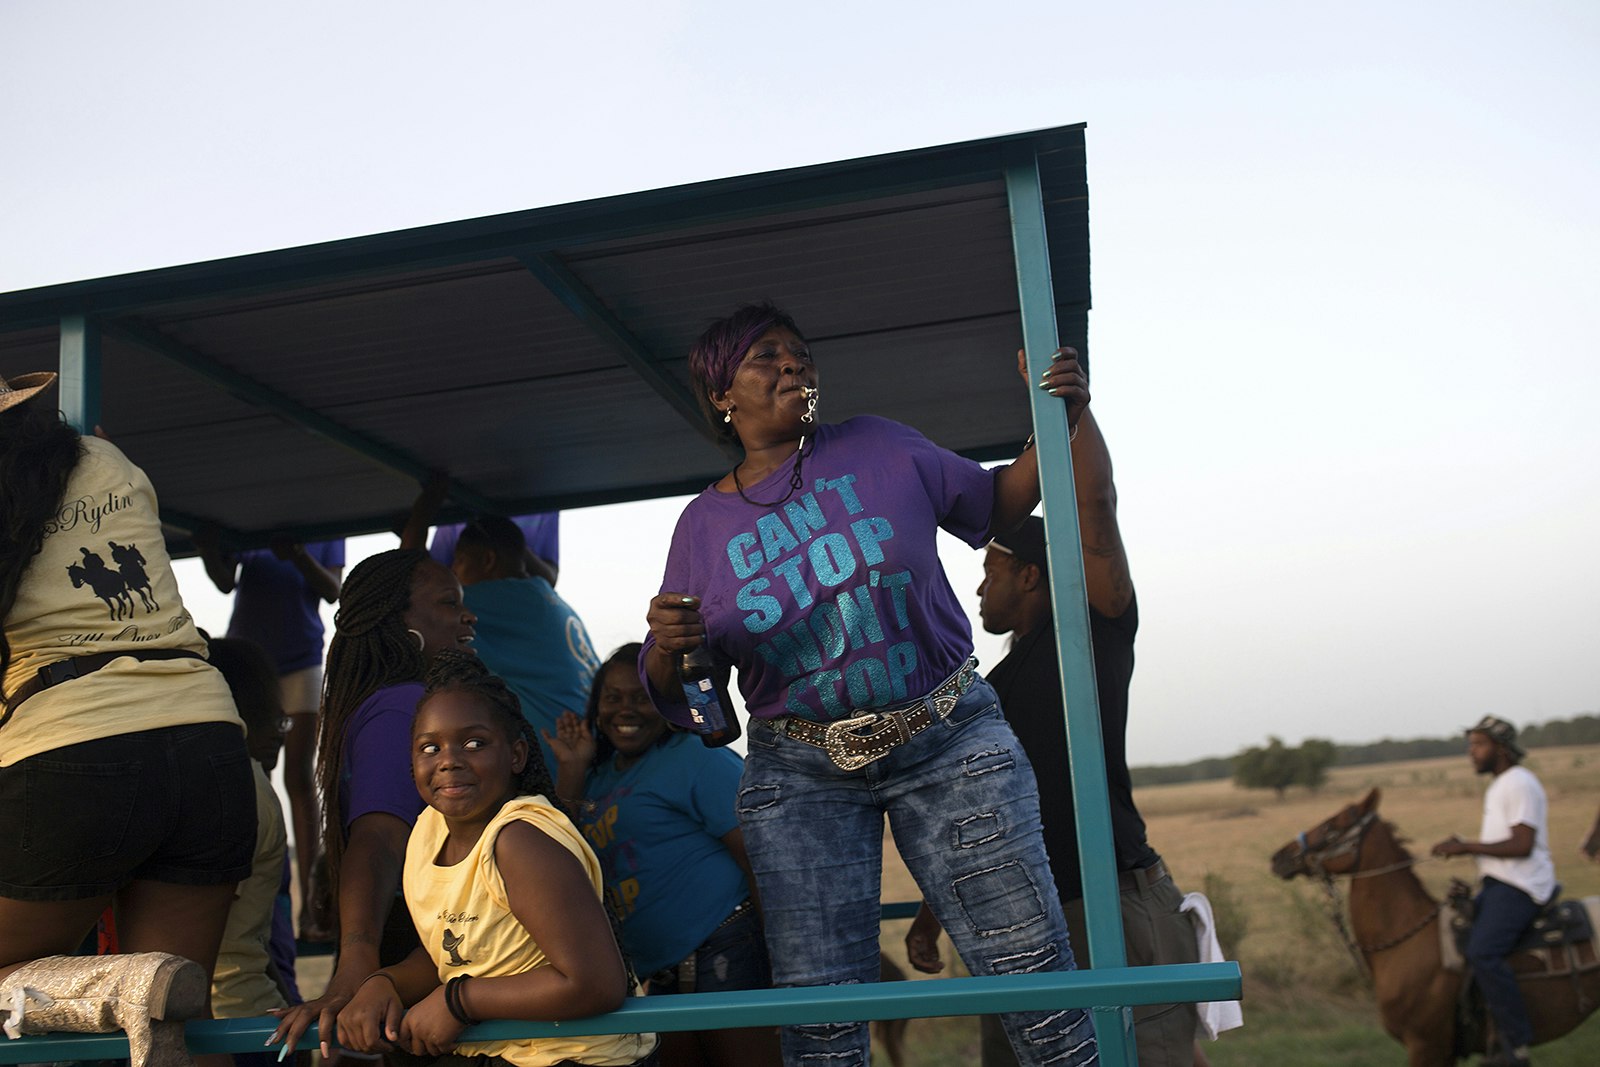 group of women, one in a purple shirt that says 'can't stop won't stop' dance on the back of a covered trailer, with horses in the background, on a trail ride